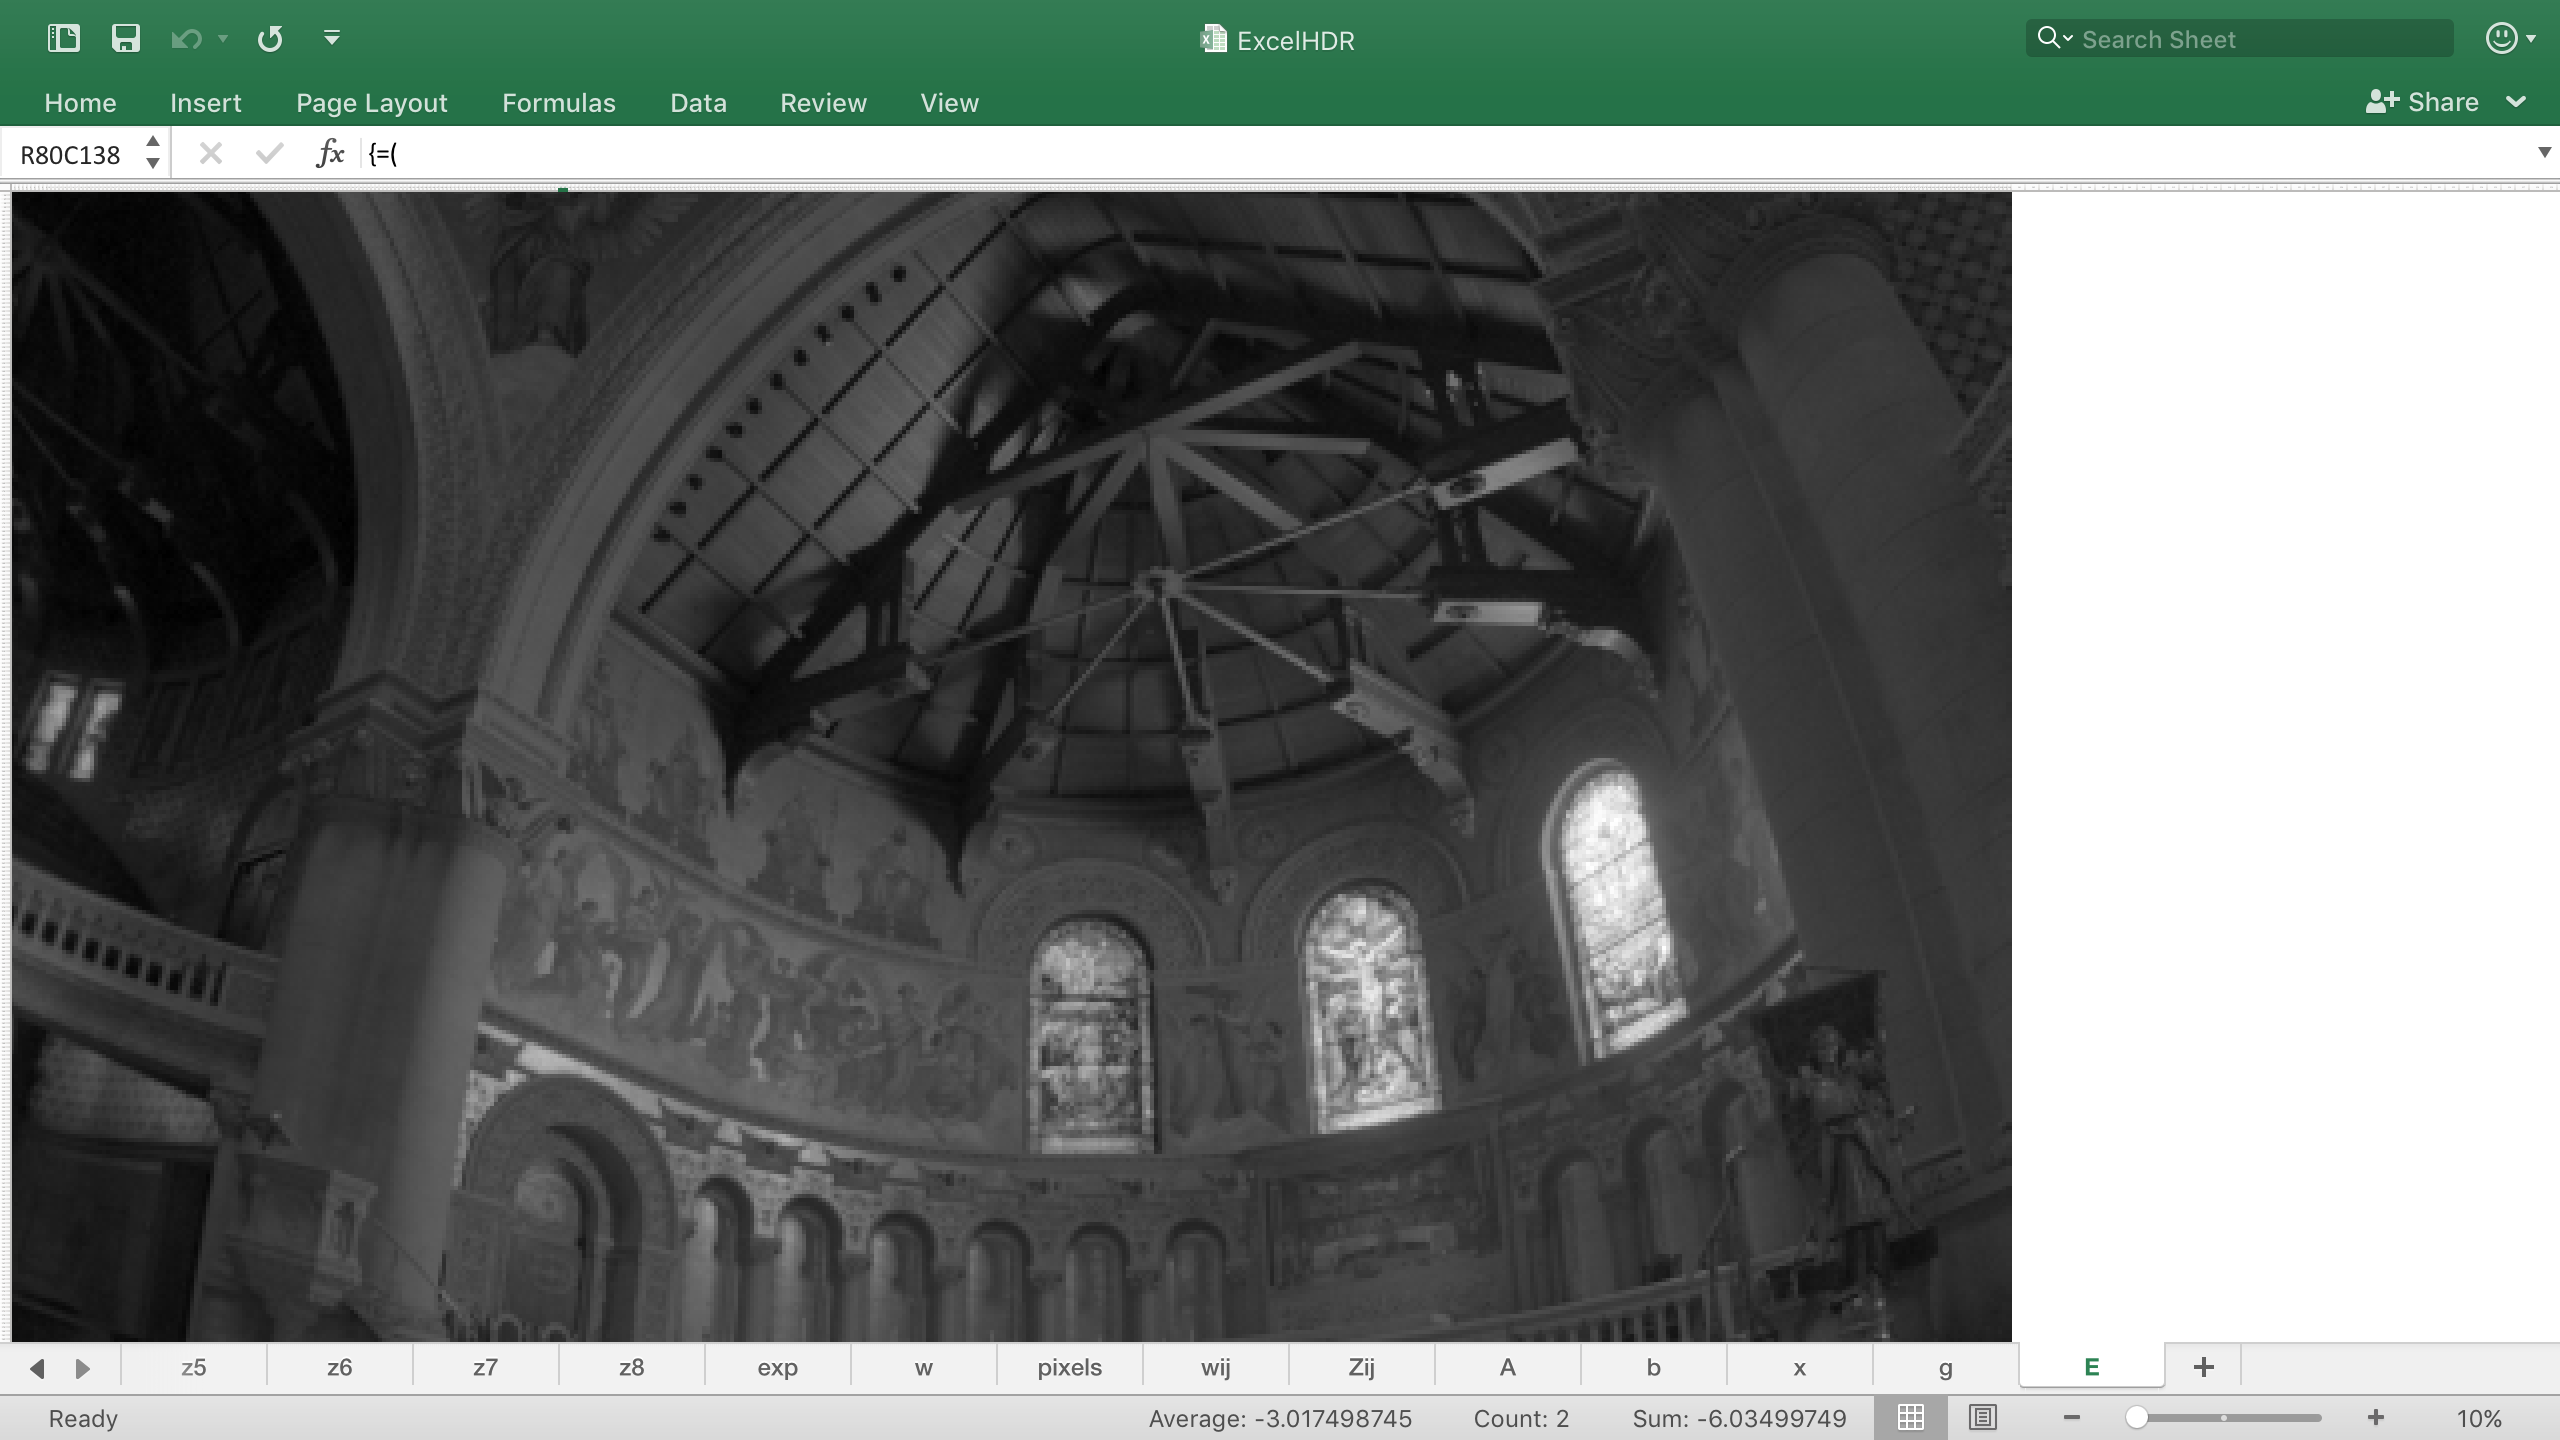 A screenshot of Microsoft Excel displaying an image of a church interior.